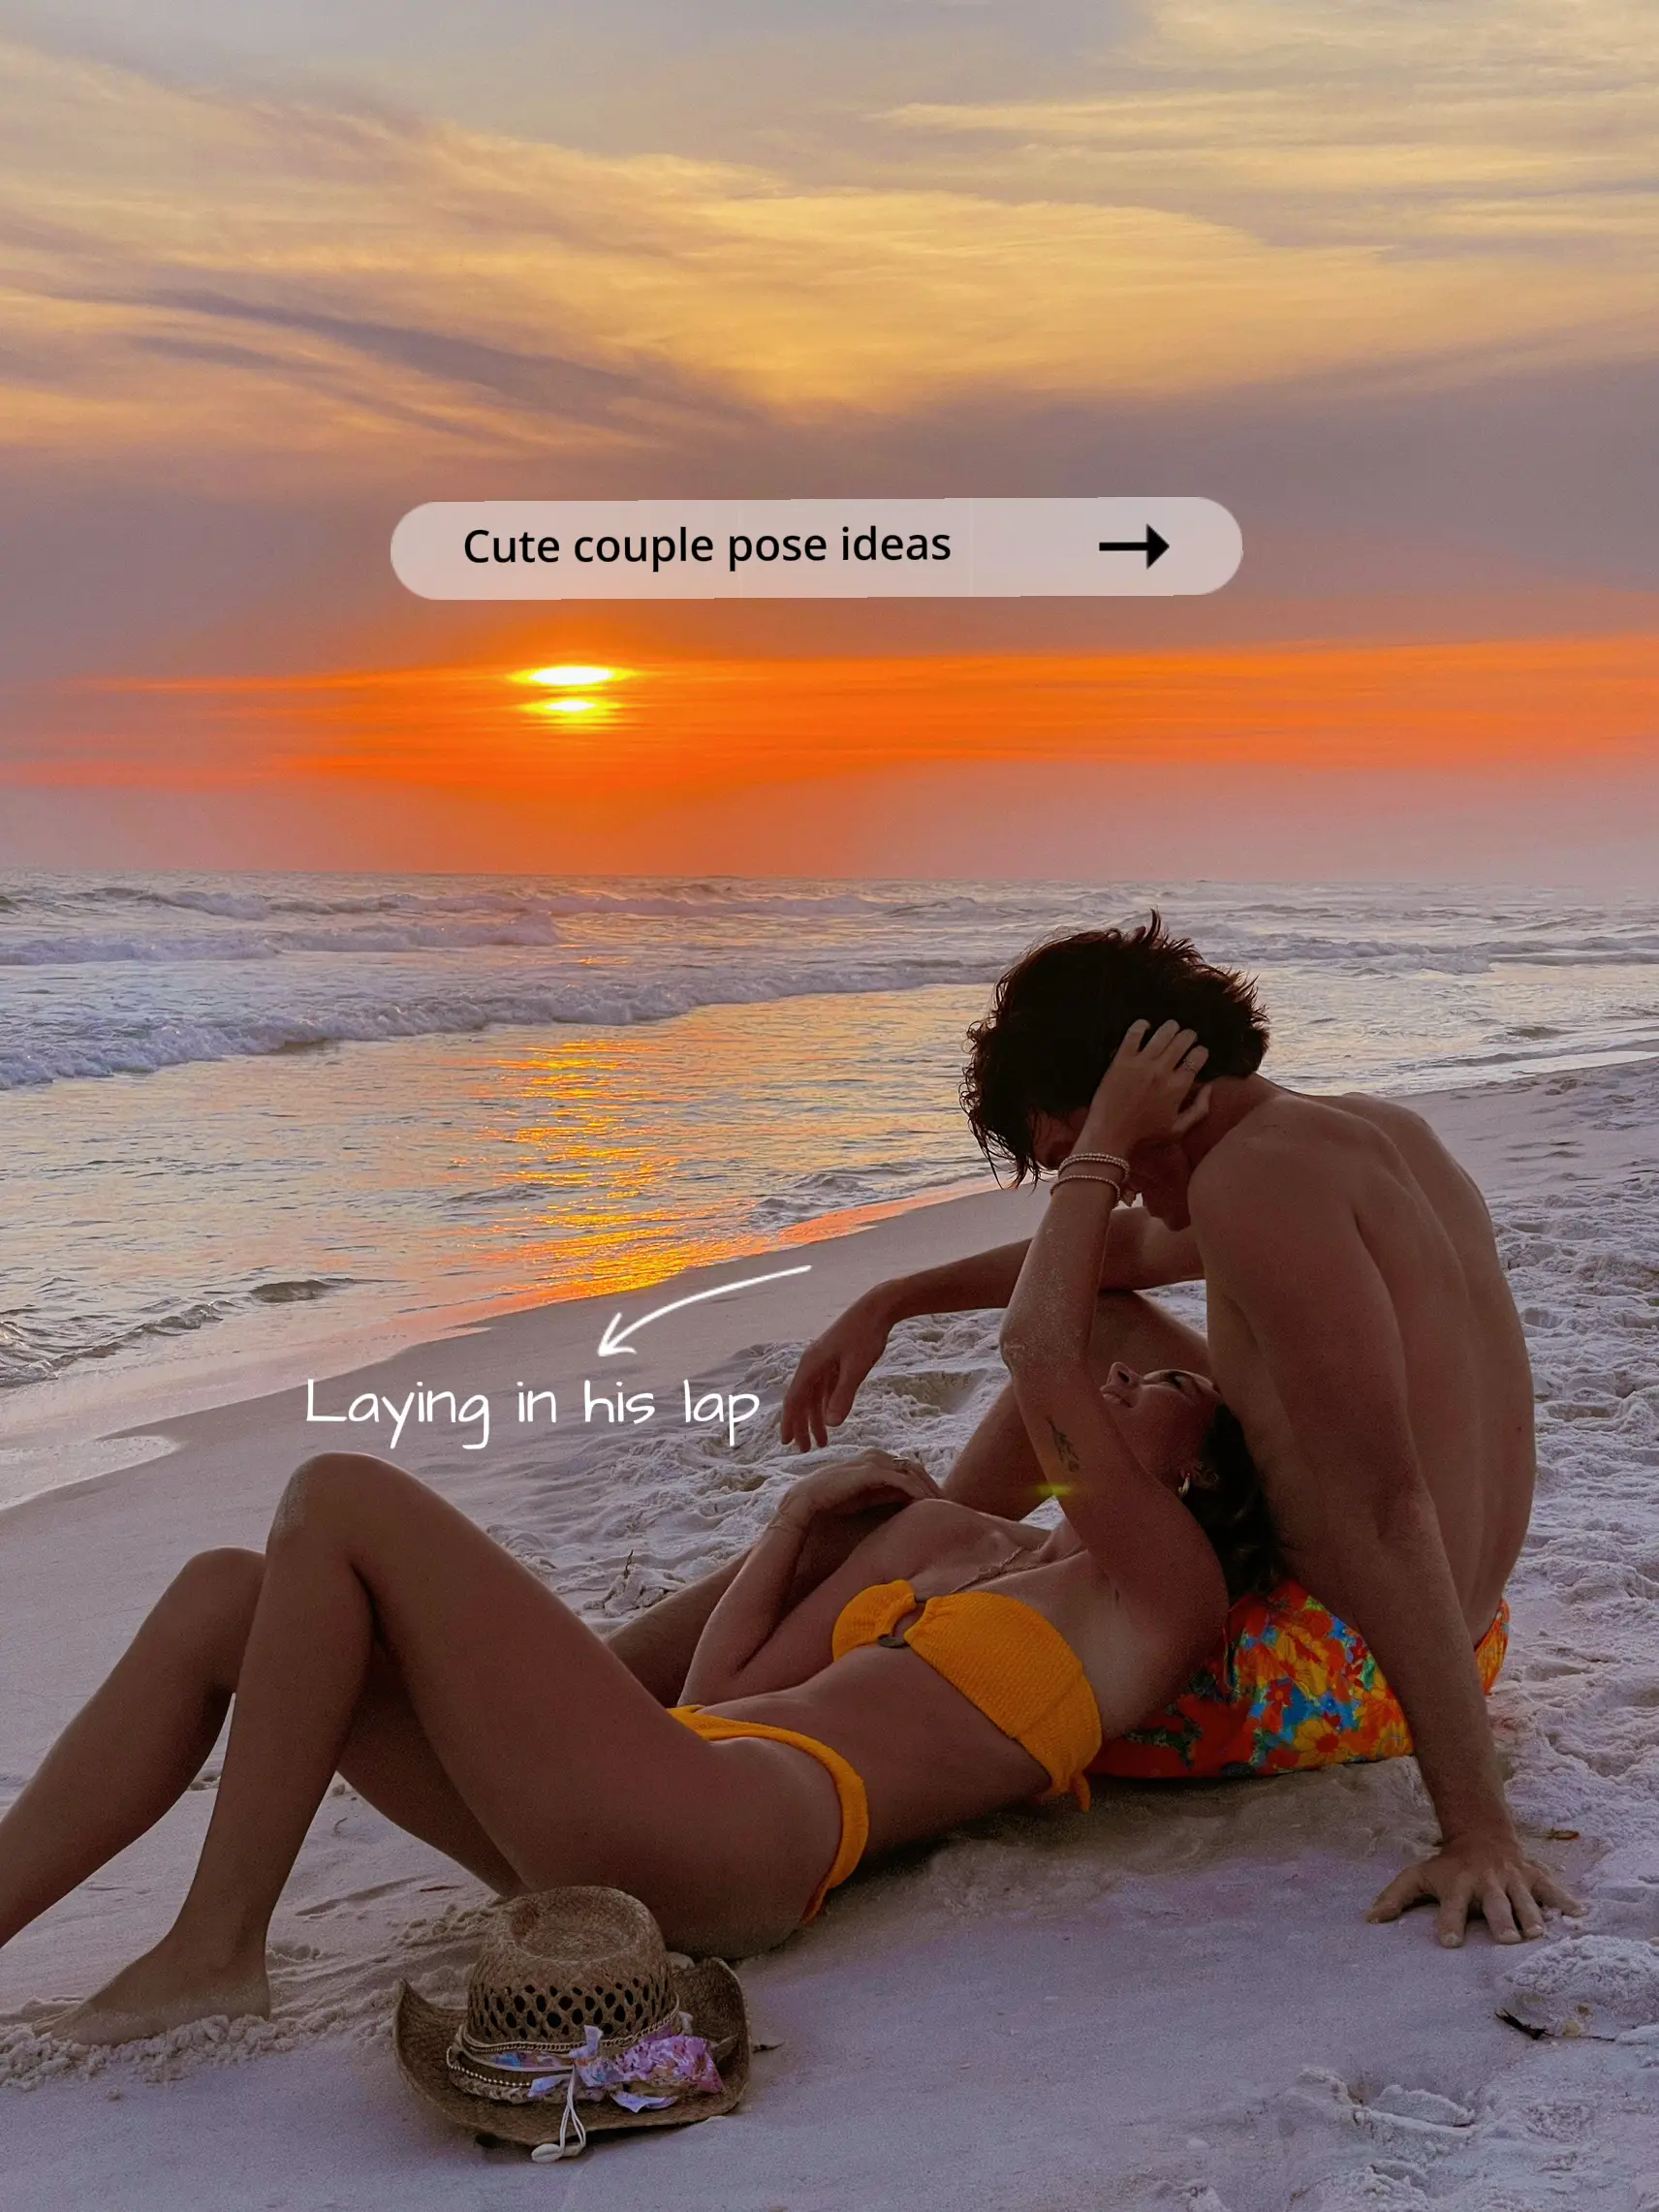  A man and a woman are laying on a beach, with the man holding the woman in his lap. The sun is setting in the background, creating a beautiful and romantic atmosphere.